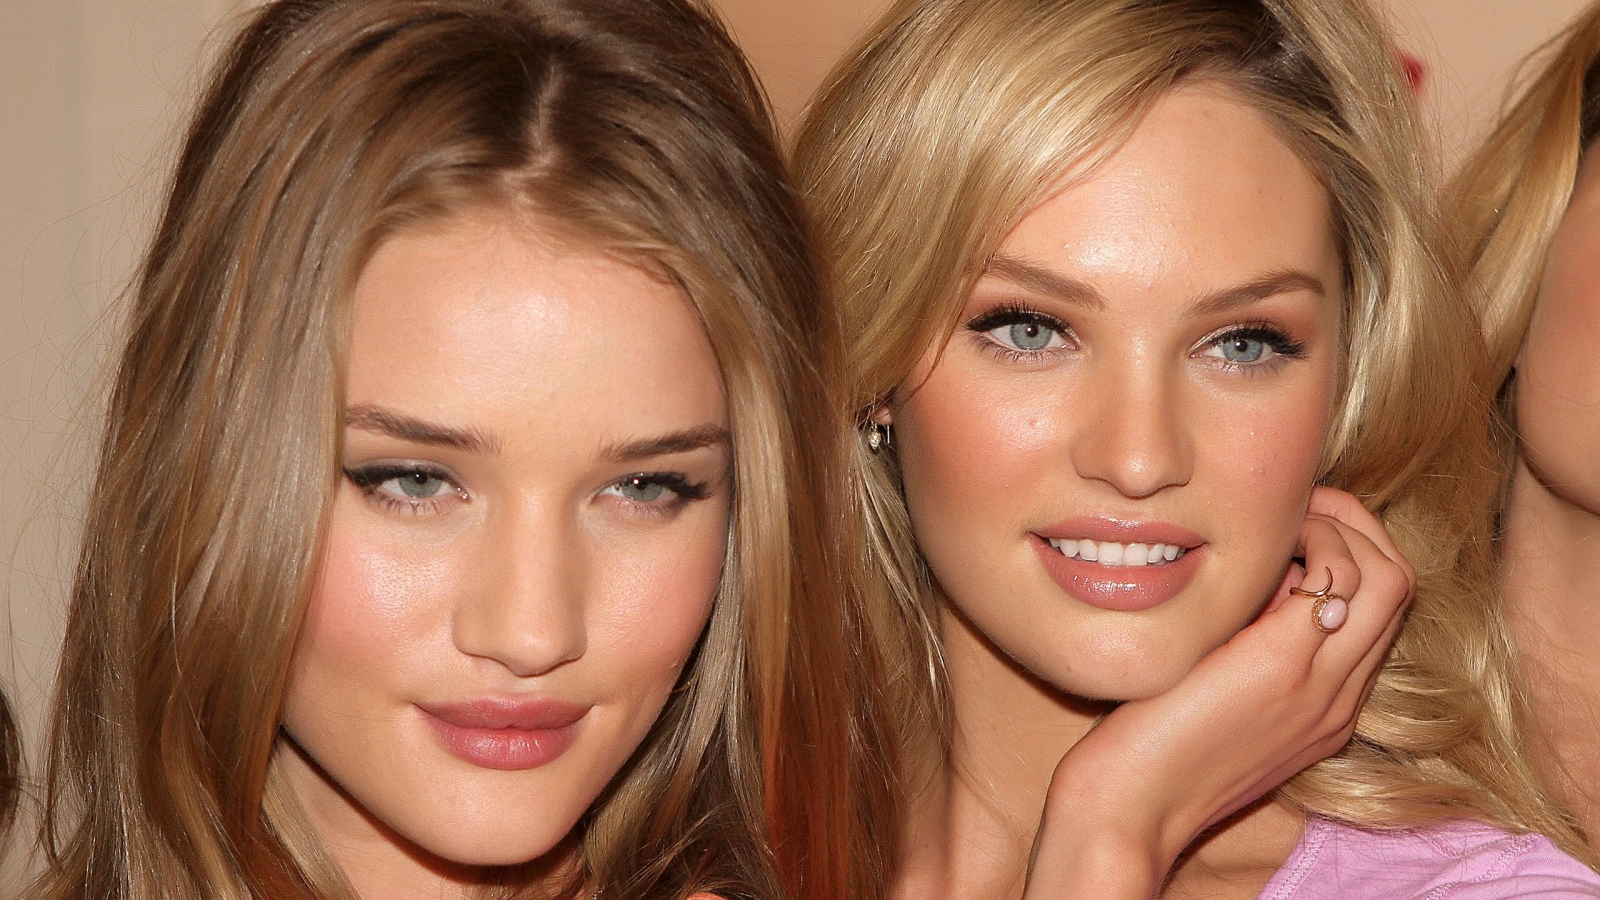 Rosie and Candice for 1600 x 900 HDTV resolution